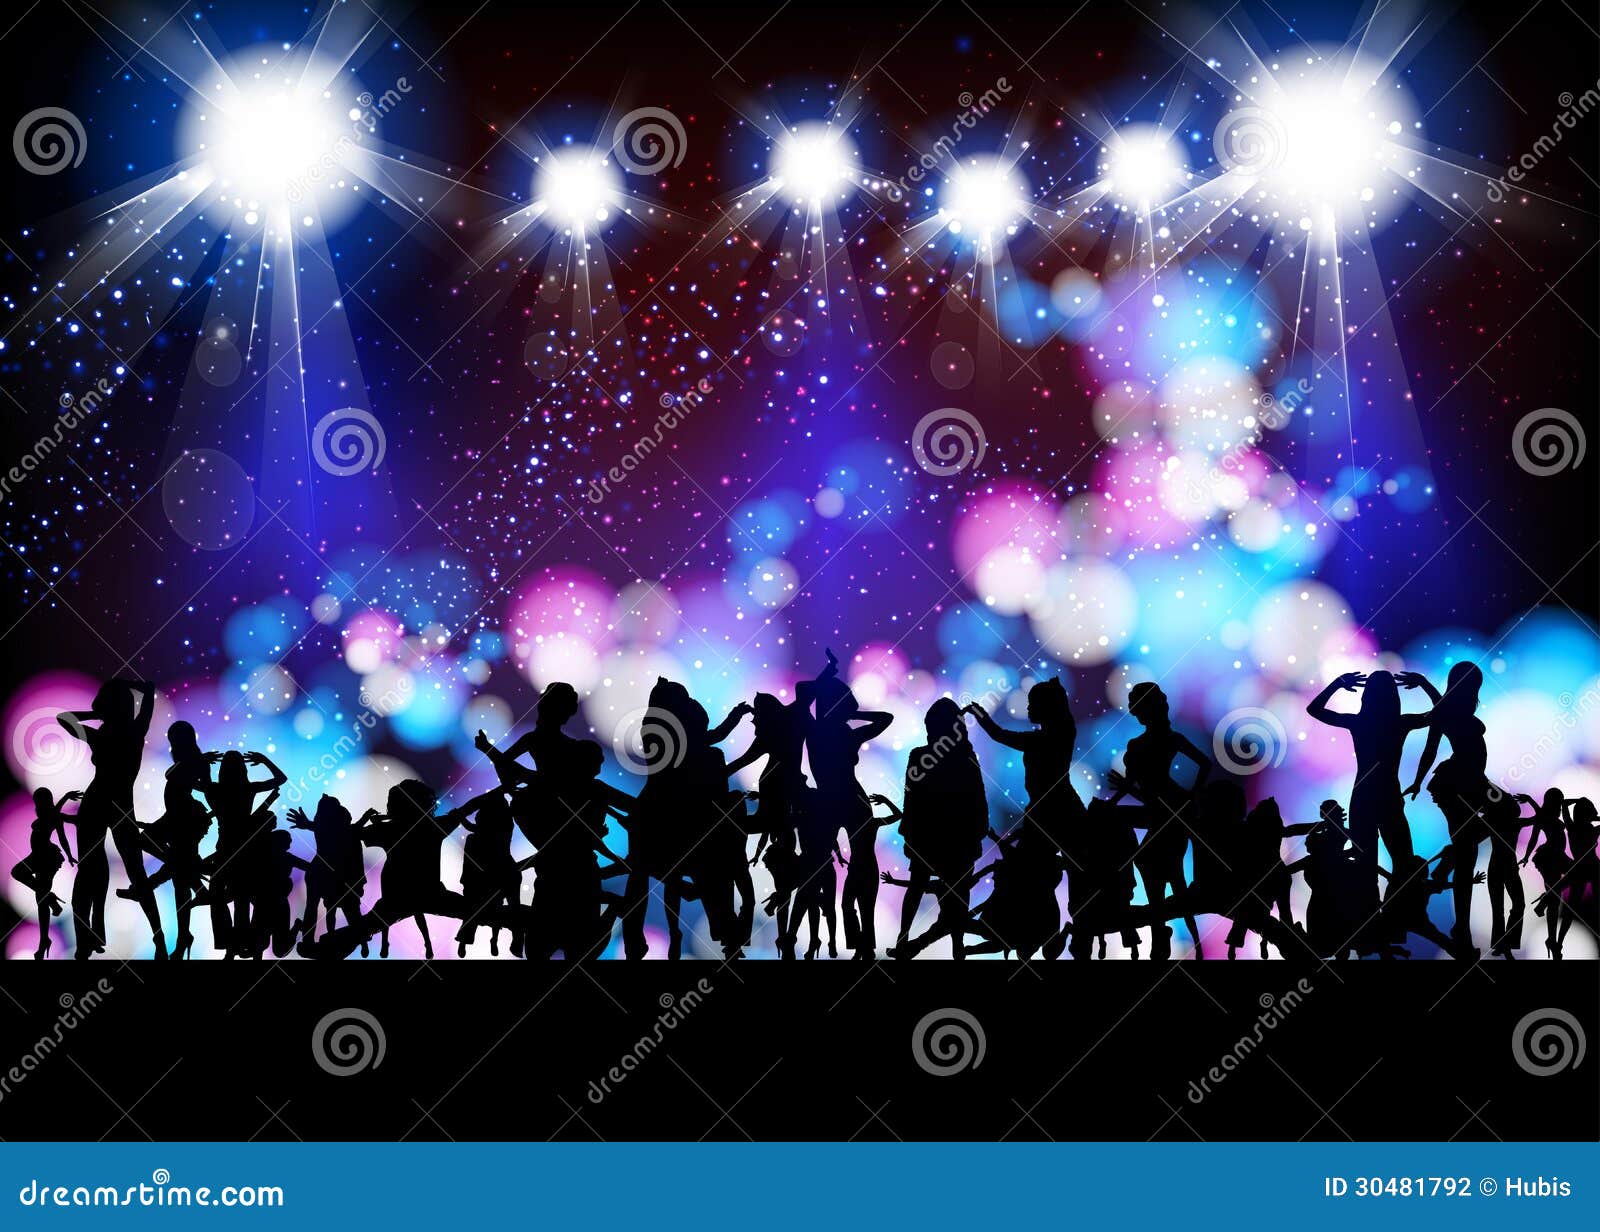 Party banner stock vector. Illustration of entertainment - 30481792